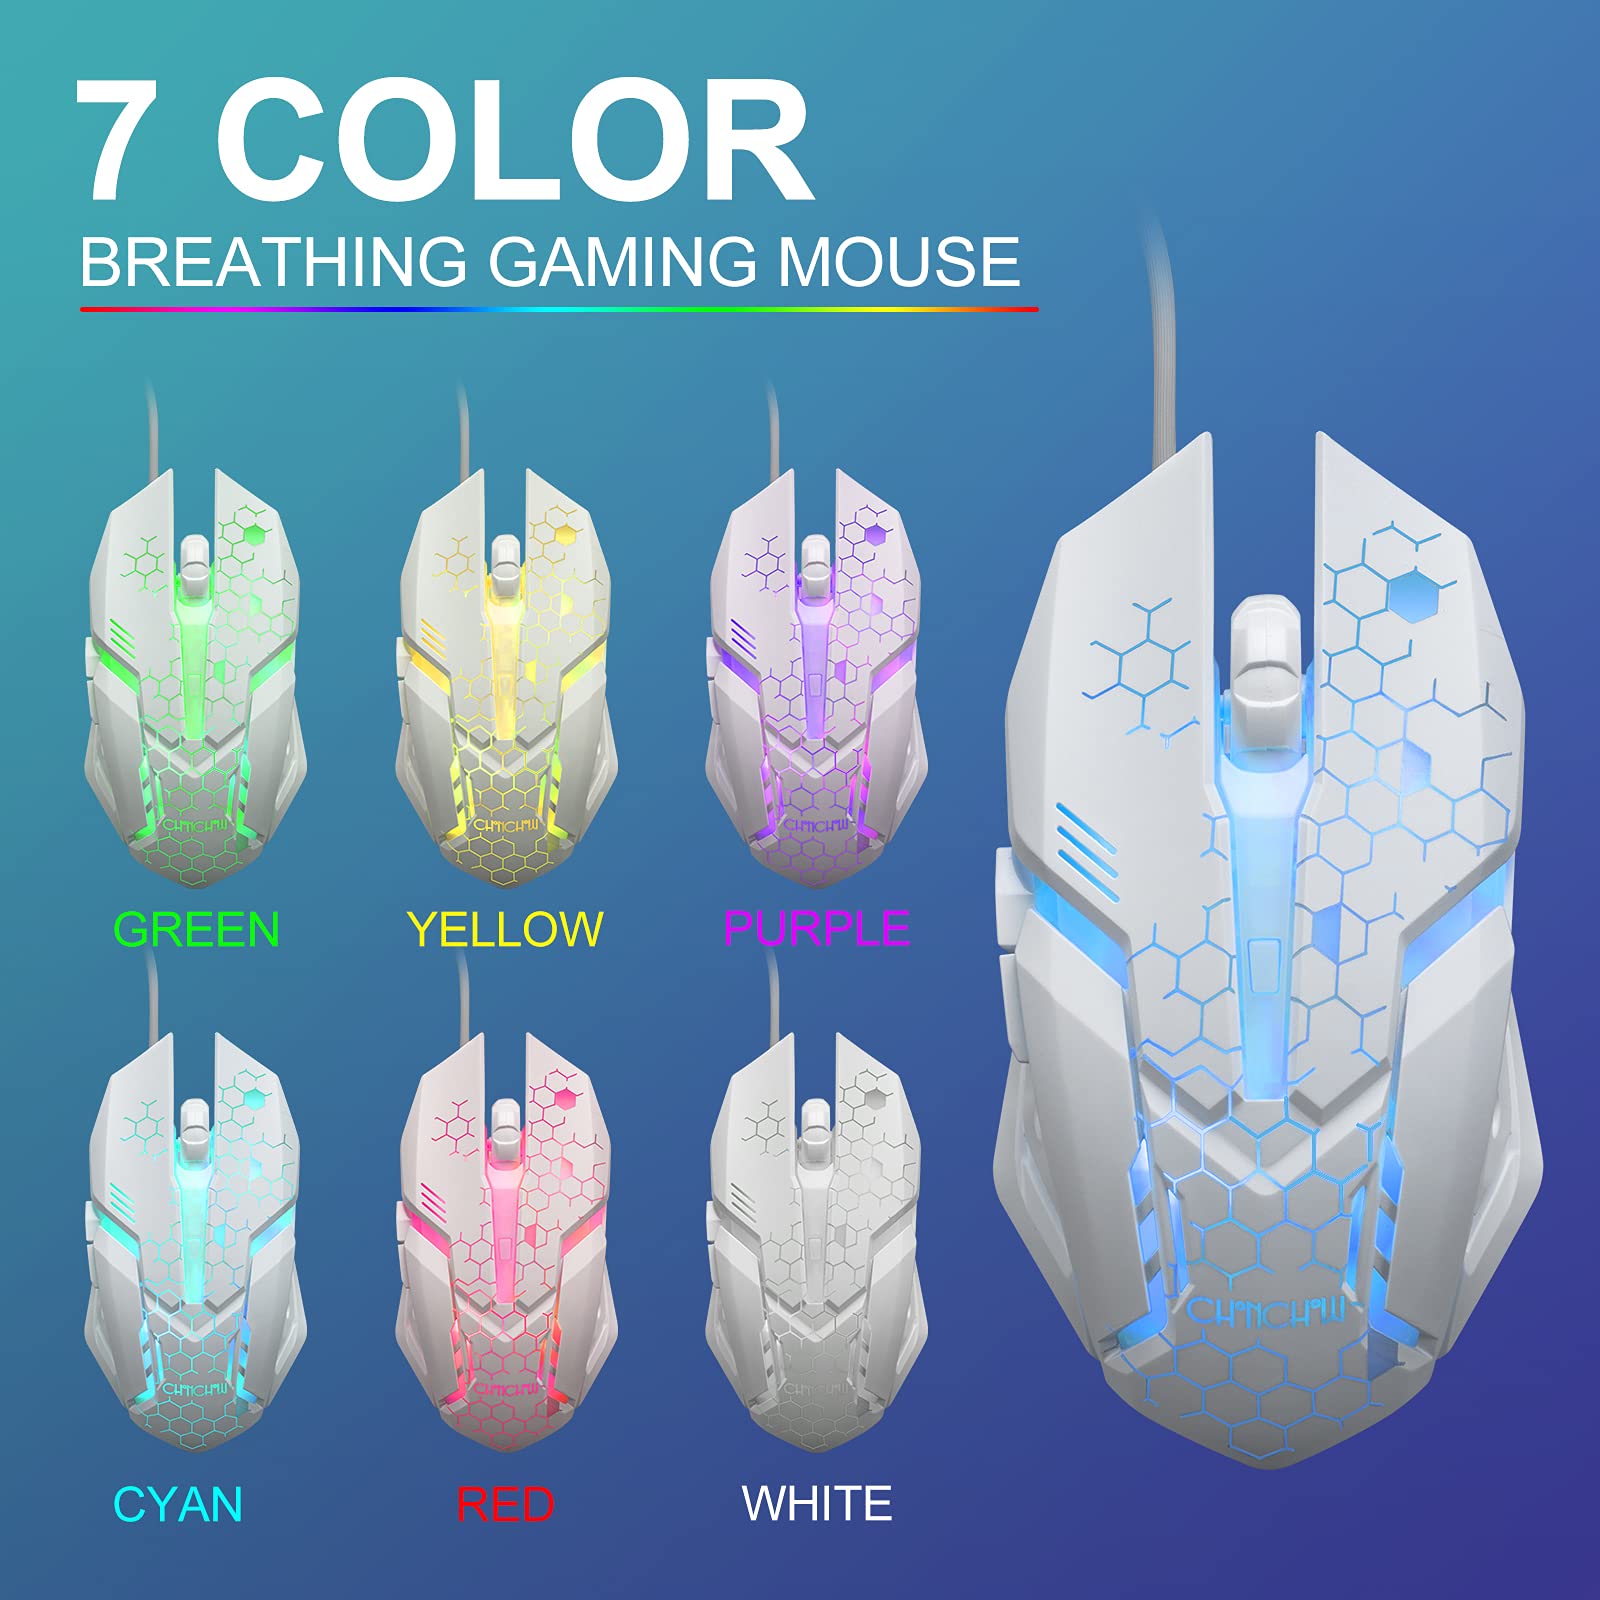 CHONCHOW LED Keyboard and Mouse, 104 Keys Rainbow Backlit Keyboard and 7 Color RGB Mouse, White Gaming Keyboard and Mouse Combo for PC Laptop Xbox PS4 Gamers and Work